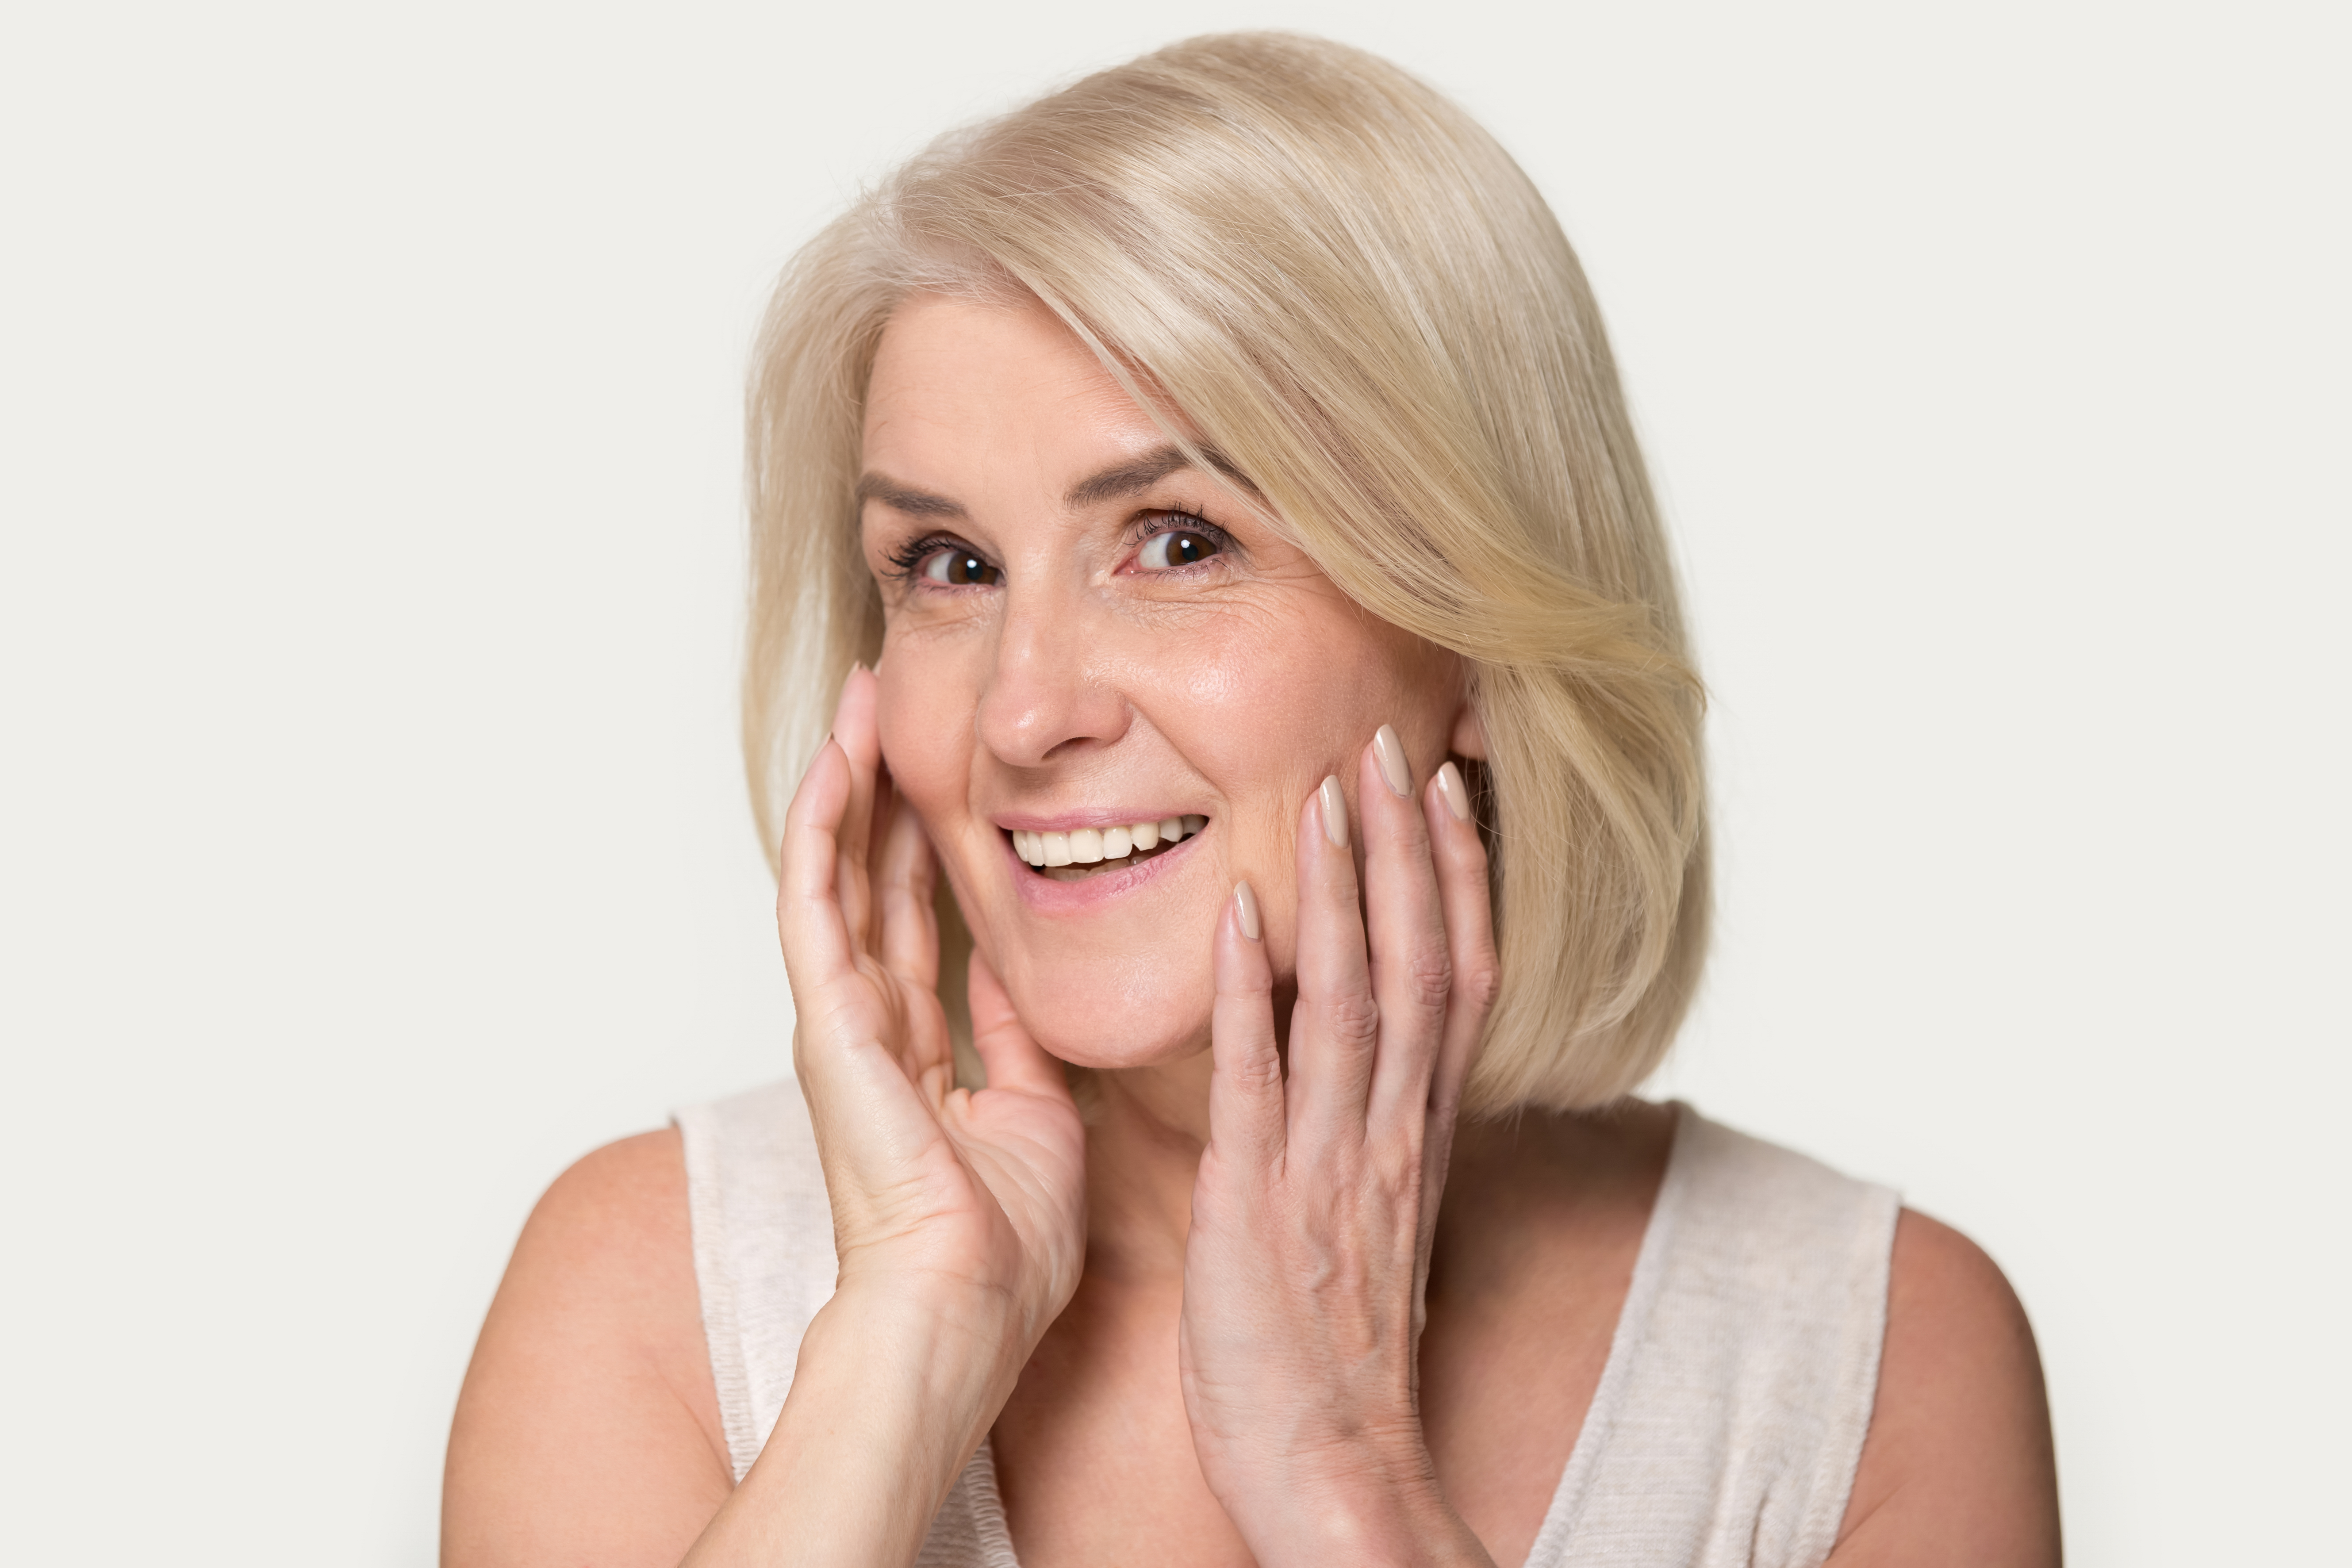 Laser skin resurfacing at CEENTA, including acne treatment, hair removal, fine line treatment, and skin rejuvenation